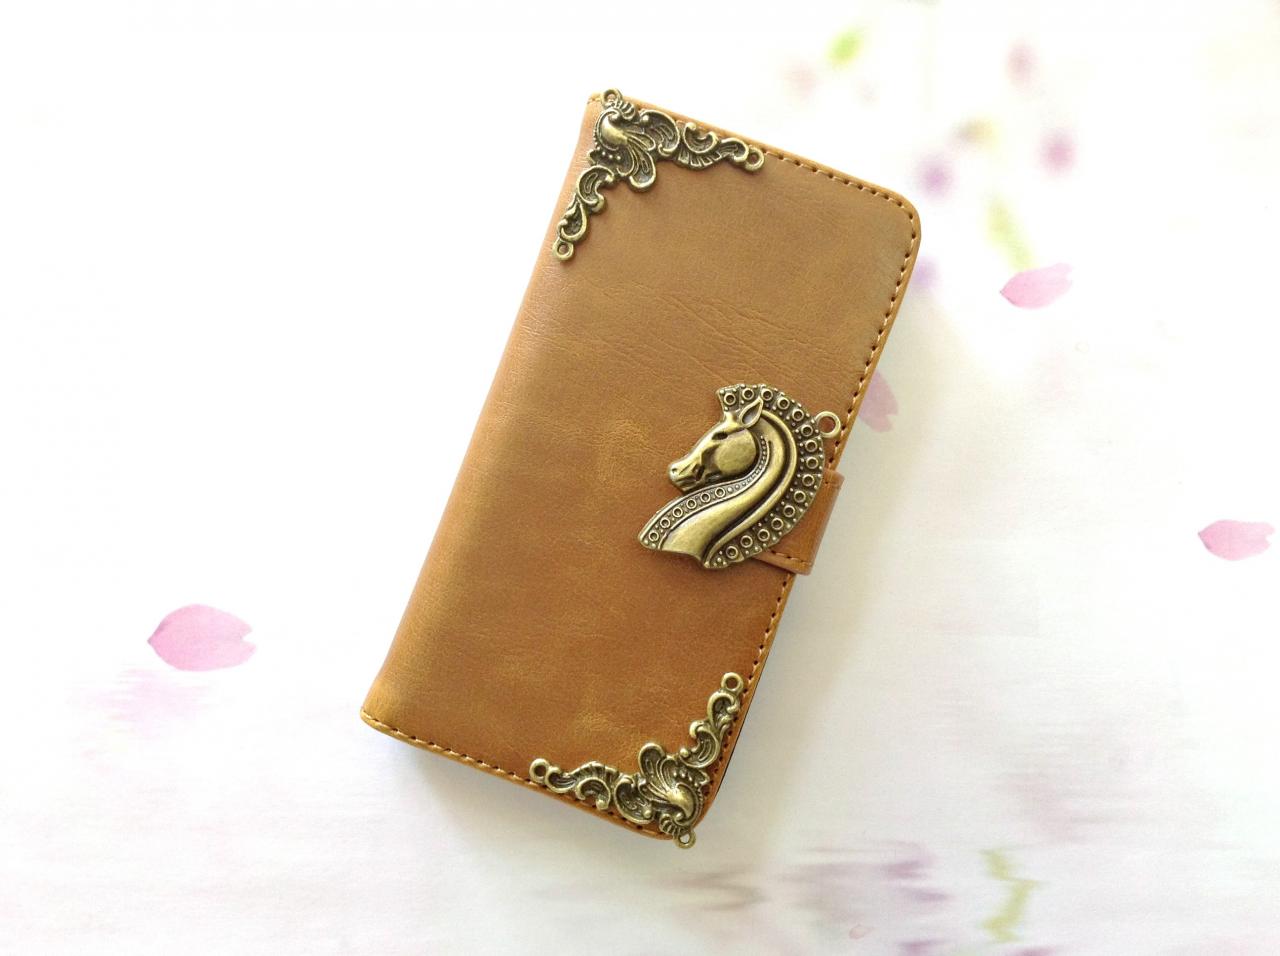 Horse Iphone 6 4.7 Leather Wallet Case, Vintage Iphone 6 Plus Leather Wallet Case, Iphone 5c, 5, 5s Leather Wallet Case, Samsung Galaxy S3, S4,